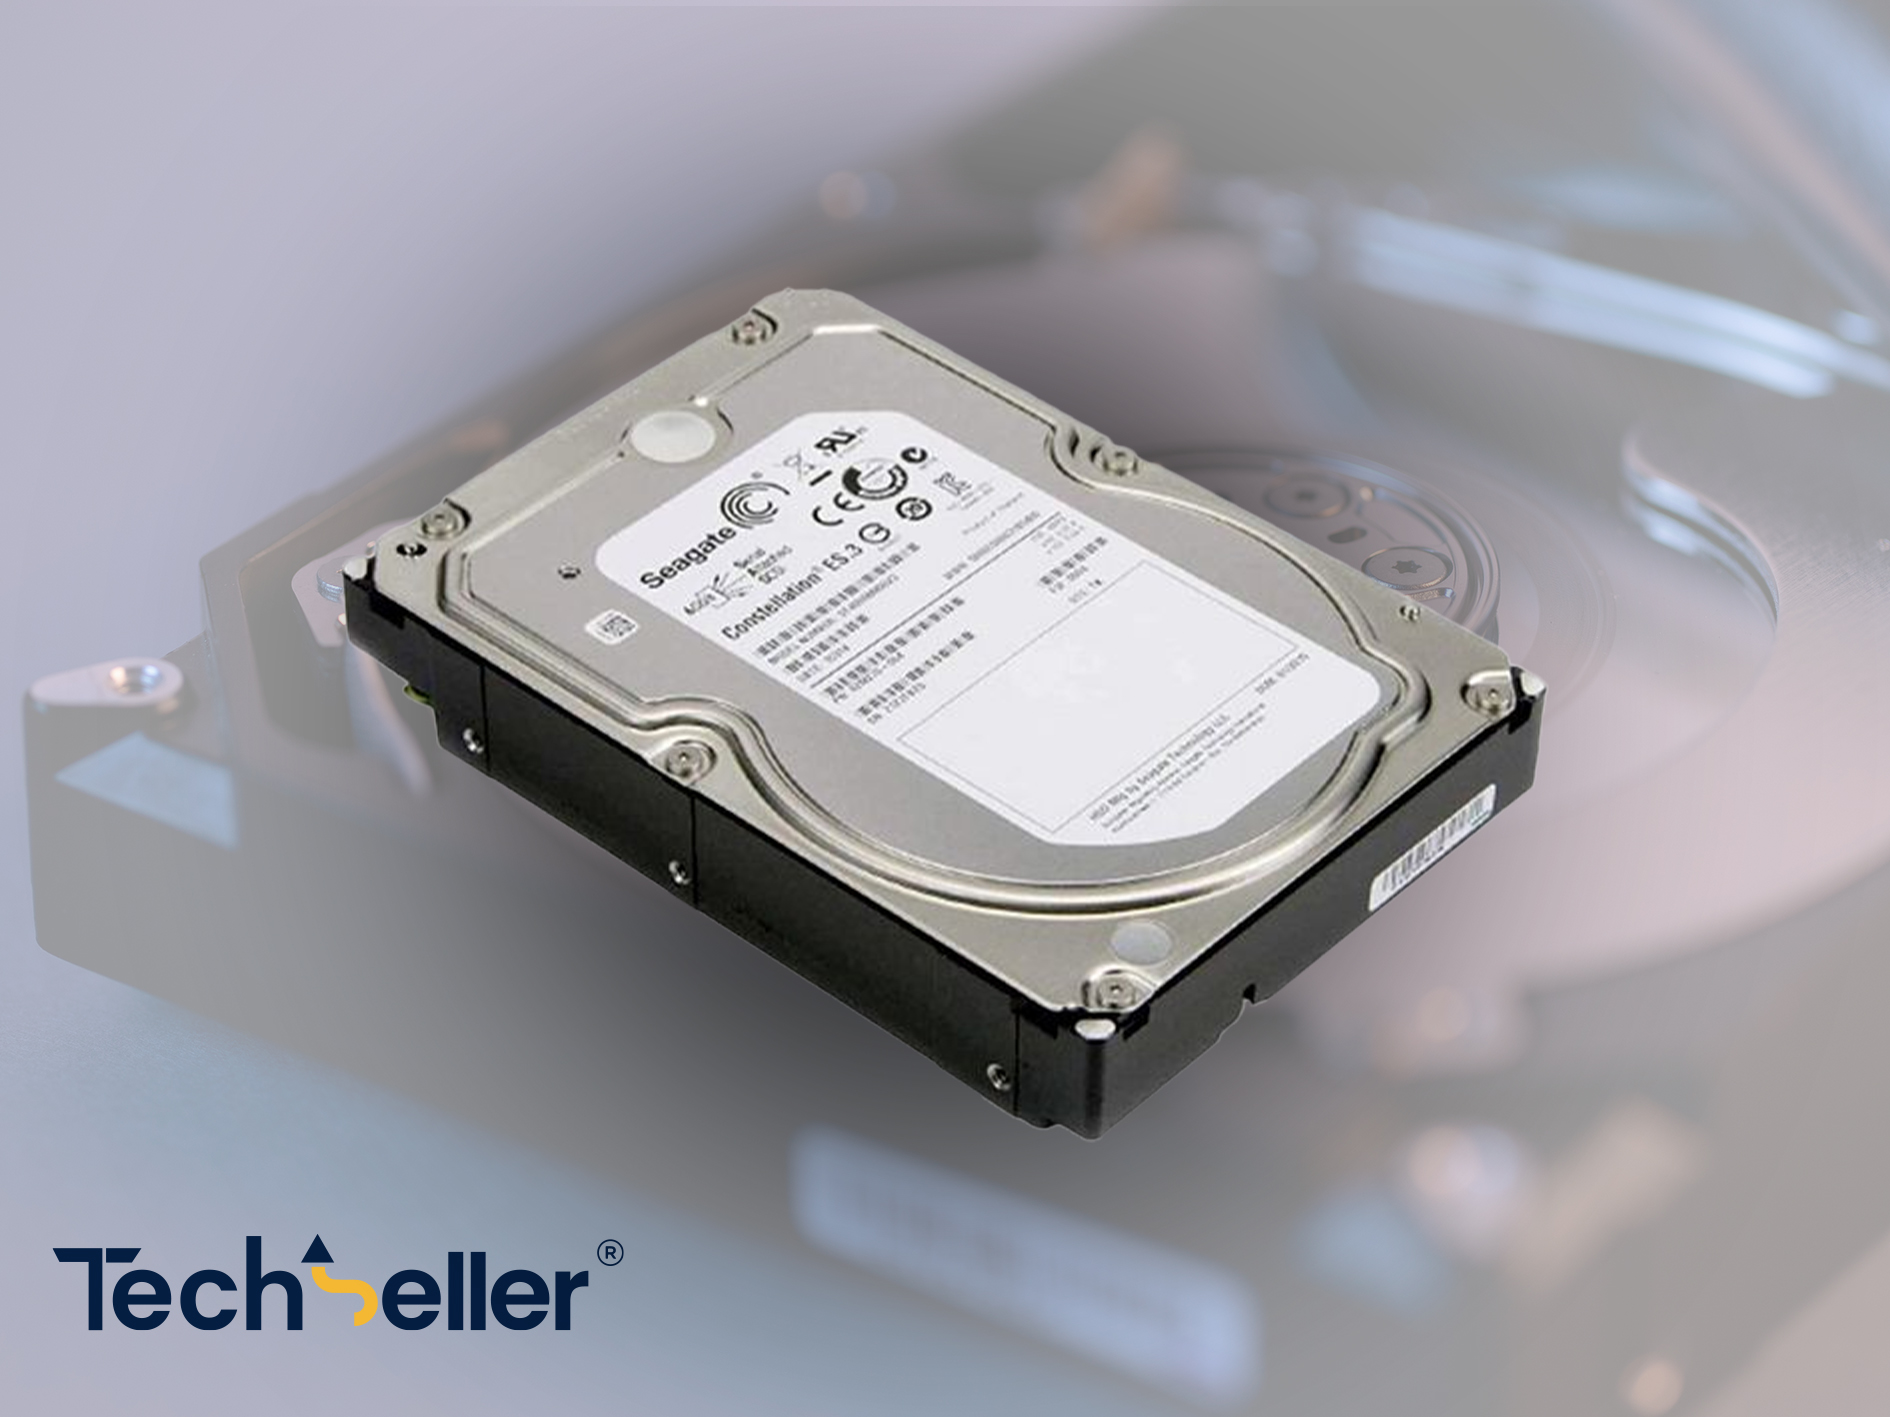 Discover the Power of Storage with ST4000NM0023 Hard Drive